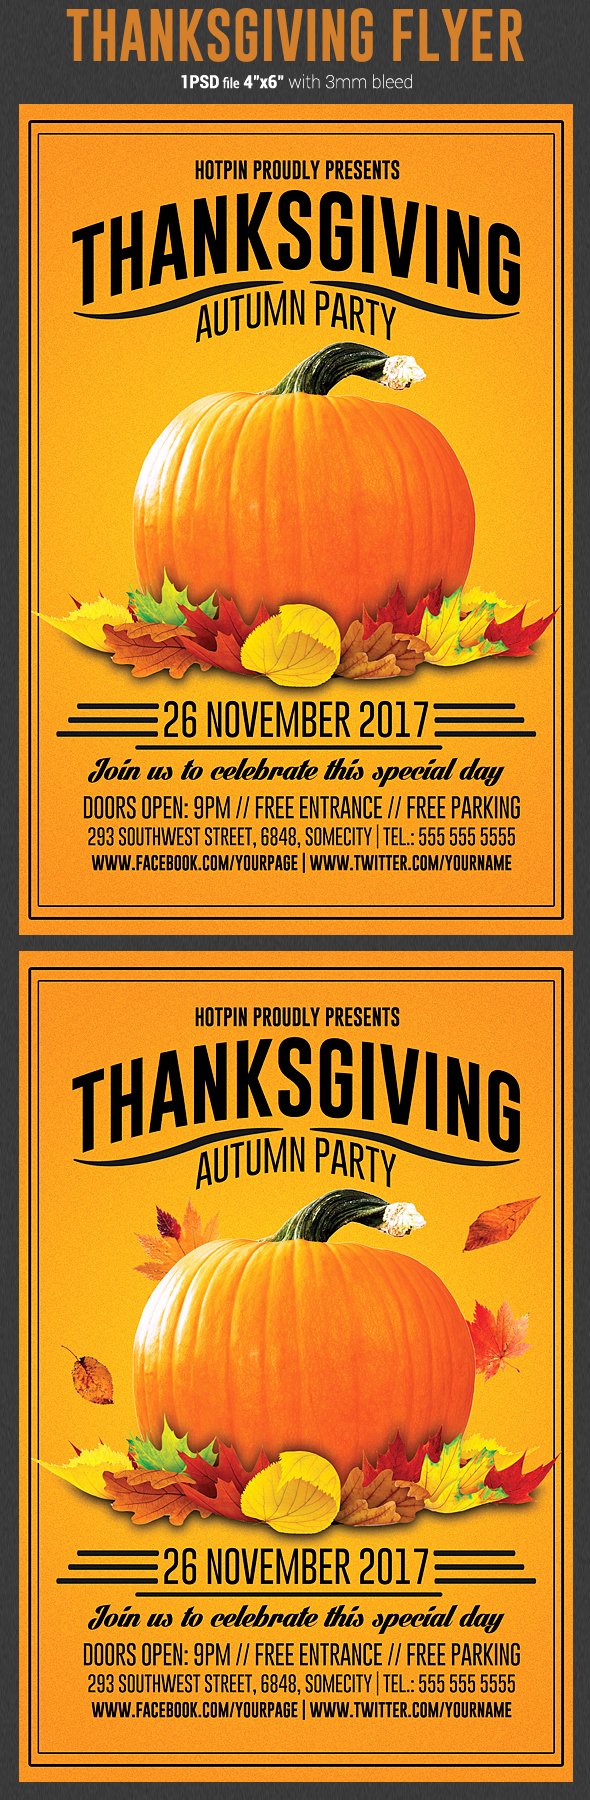 Thanksgiving Flyer Template Free Inspirational Thanksgiving Flyer Template